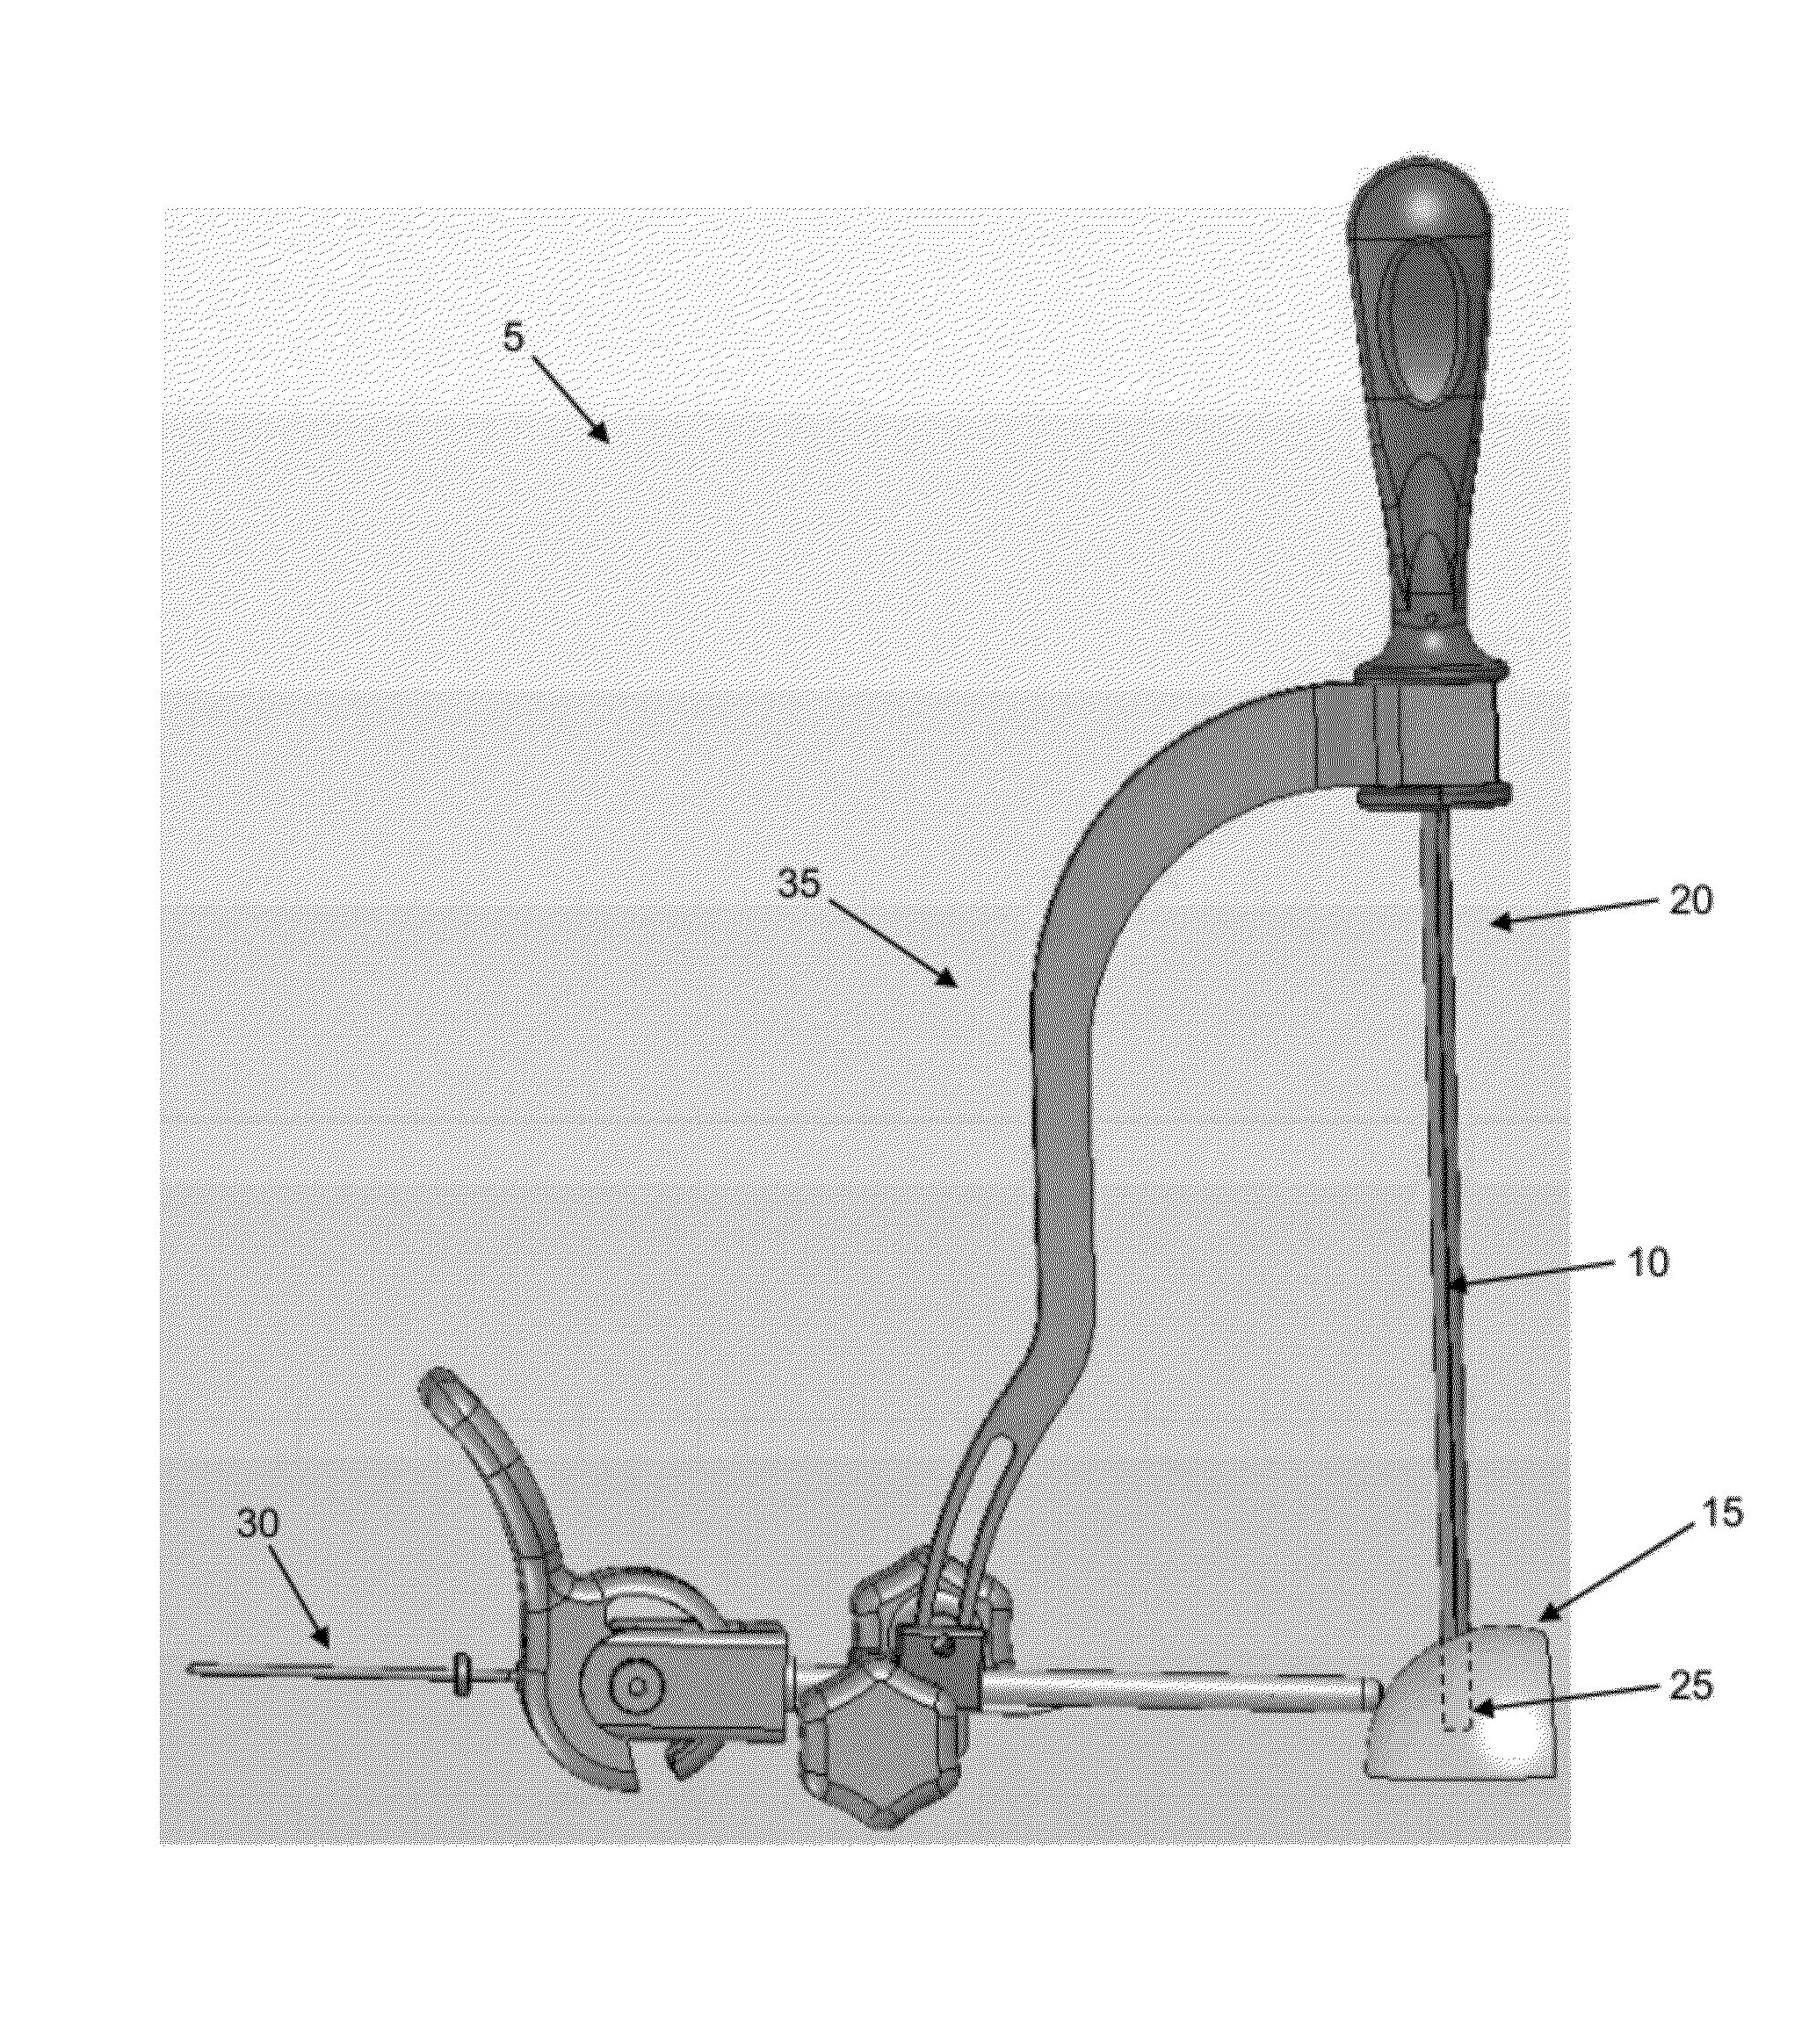 Method and apparatus for attaching an elongated object to bone